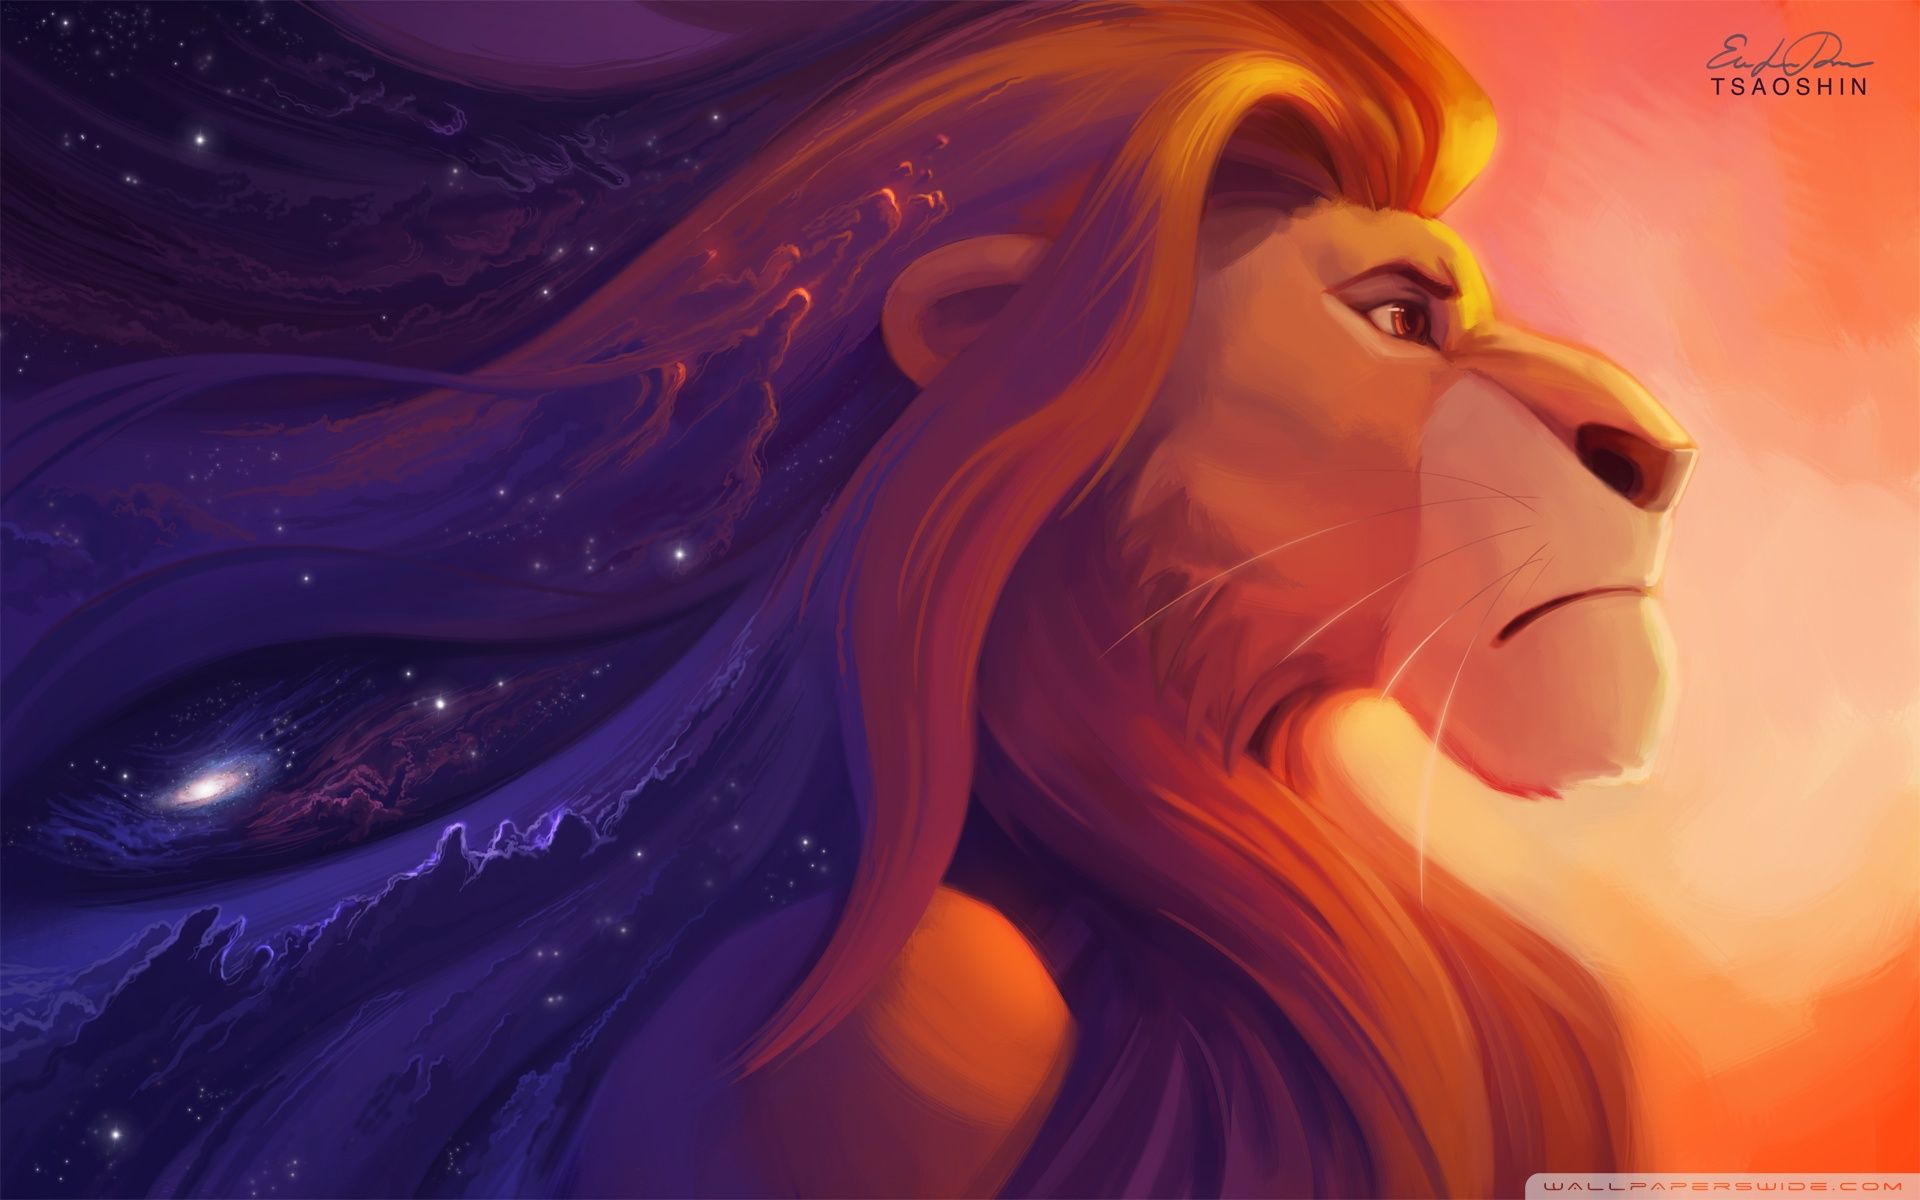 The lion king wallpaper 2560x1600 - The Lion King